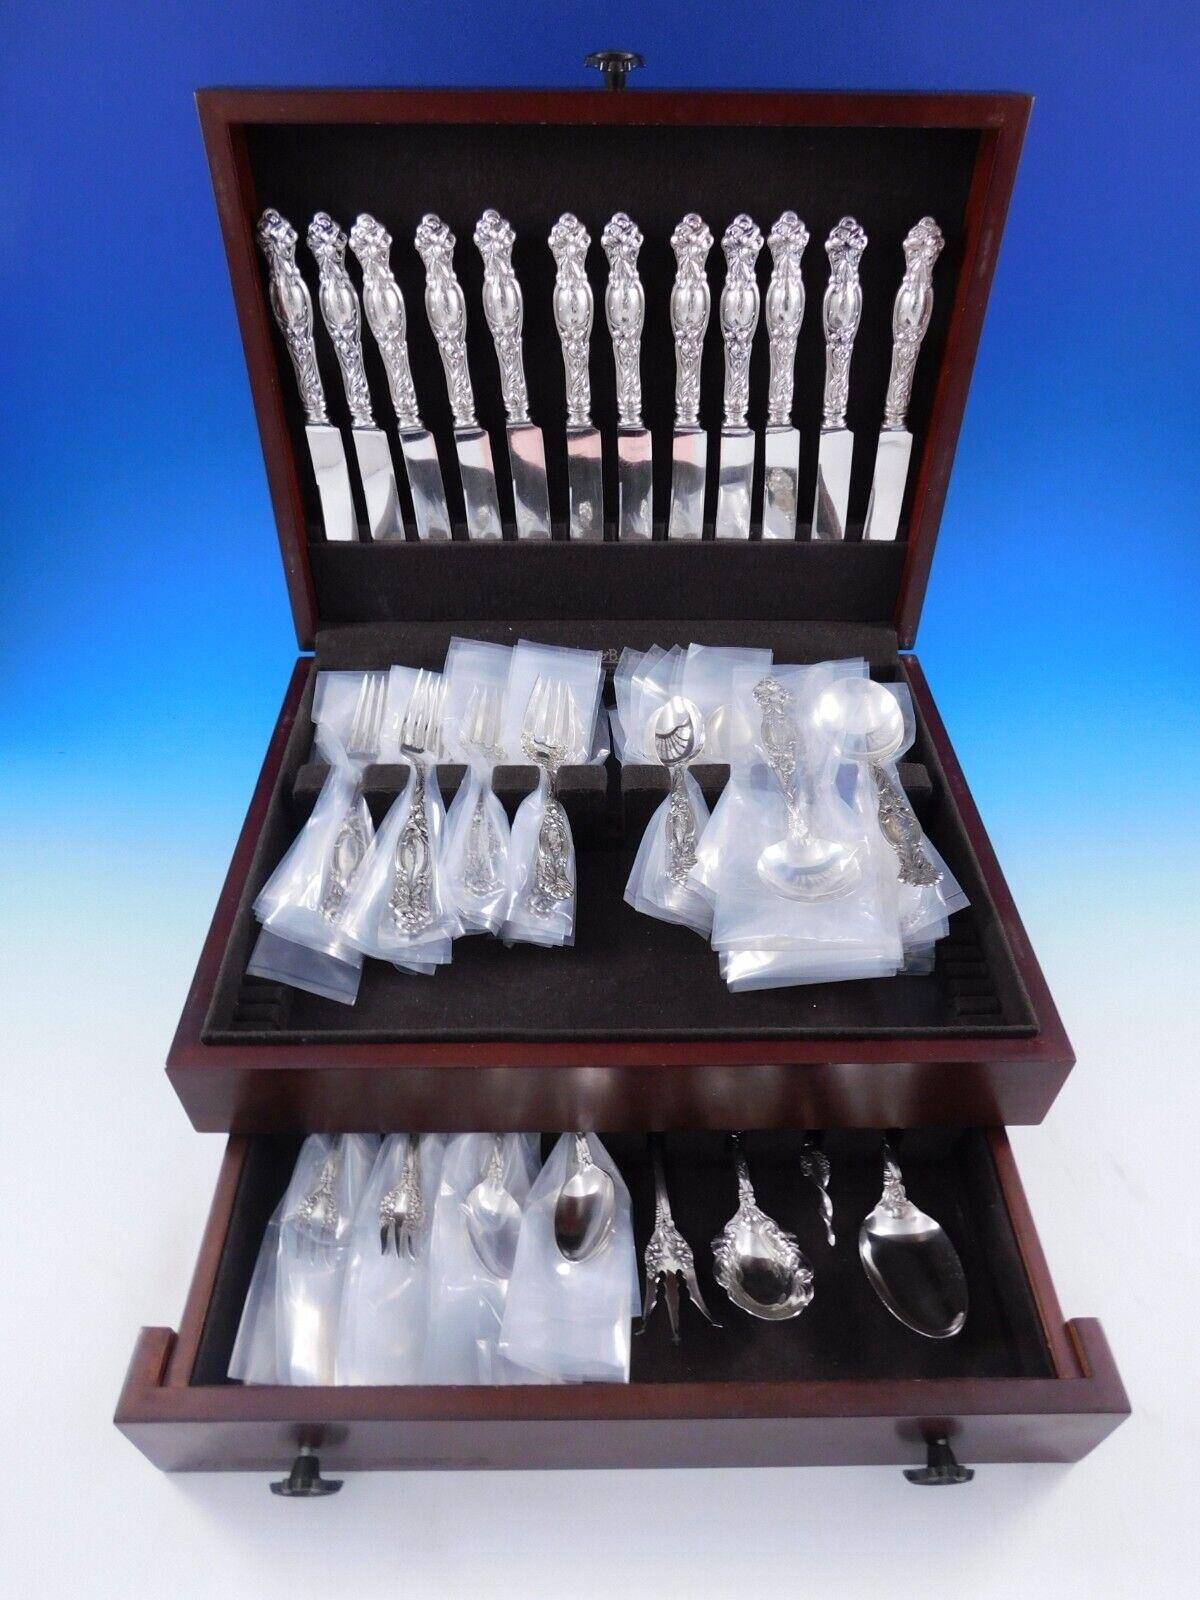 Frontenac by International sterling silver Flatware set - 88 pieces. This pattern was introduced in the year 1903 and features beautiful Art Nouveau lily flowers with leaf detailing that flows down the handle, with more flowers on the shoulders of